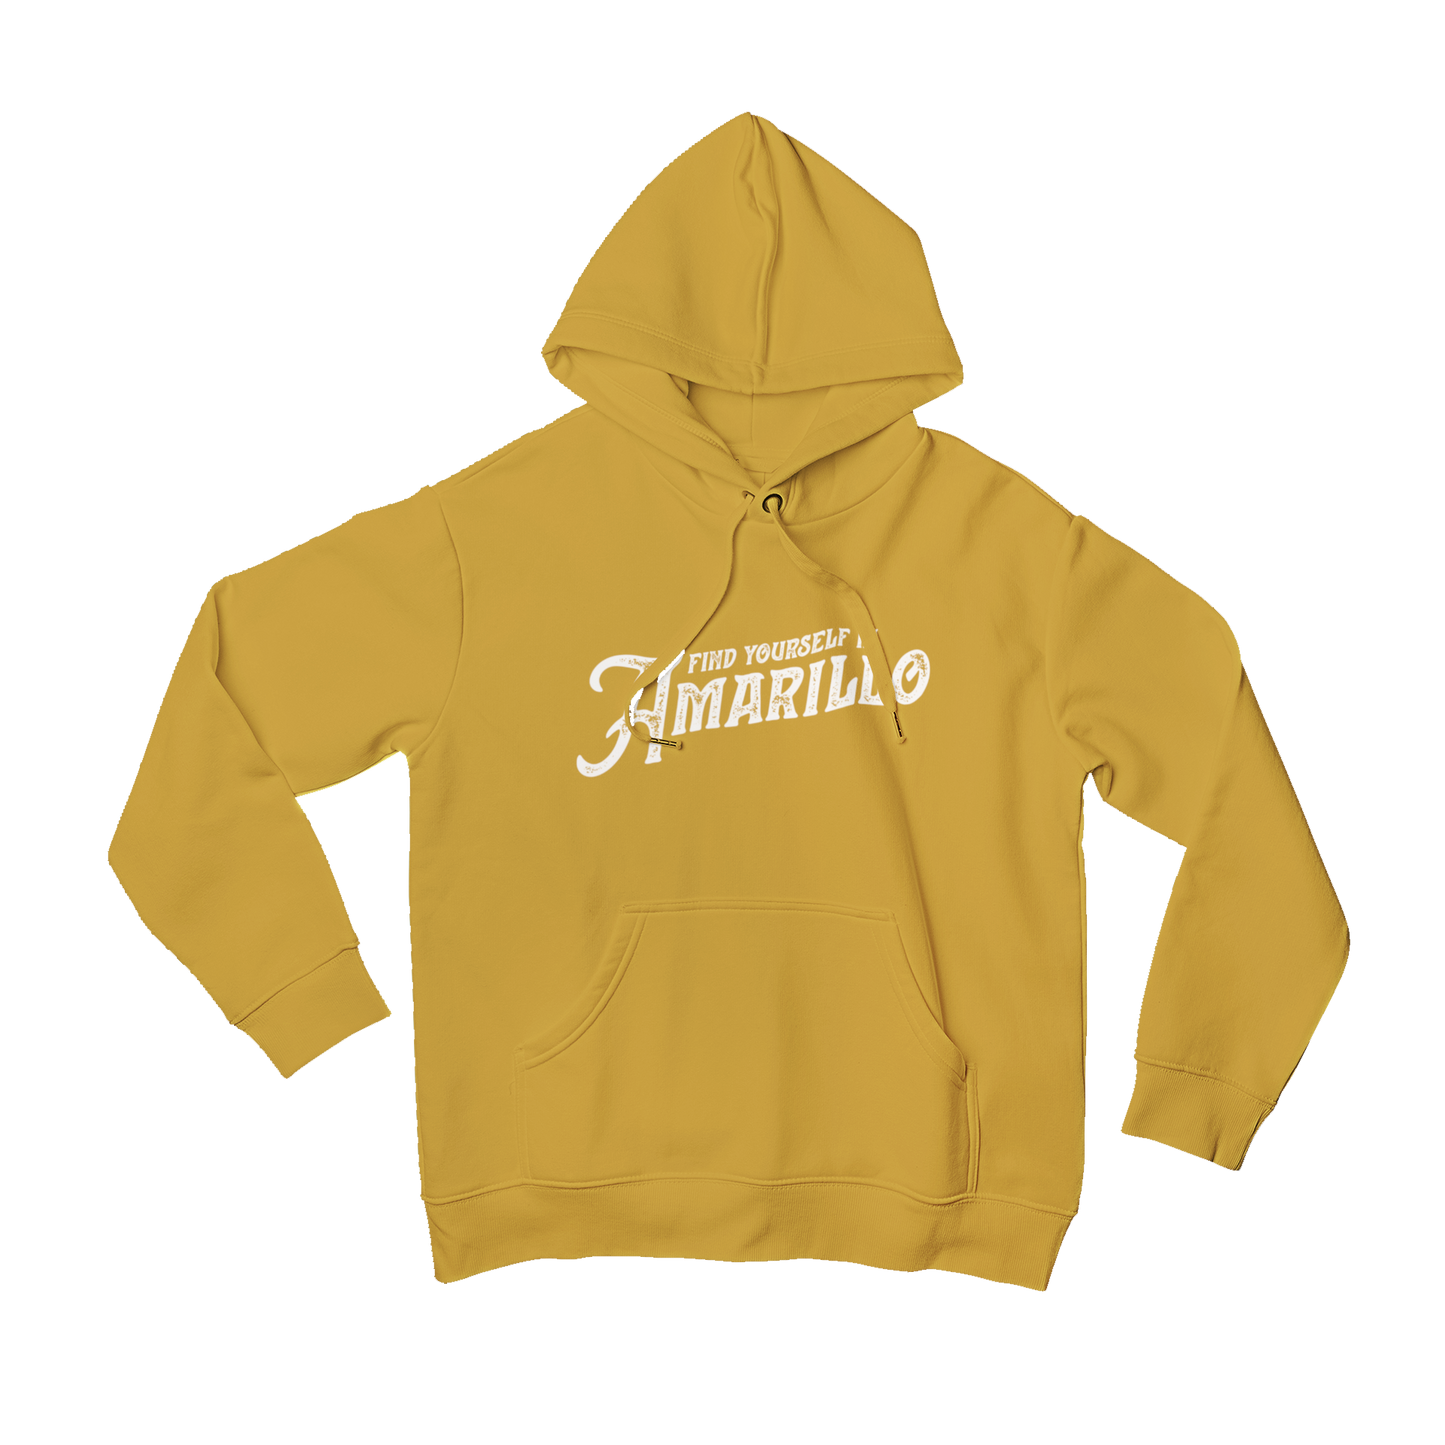 Amarillo Texas Hoodie - Find Yourself